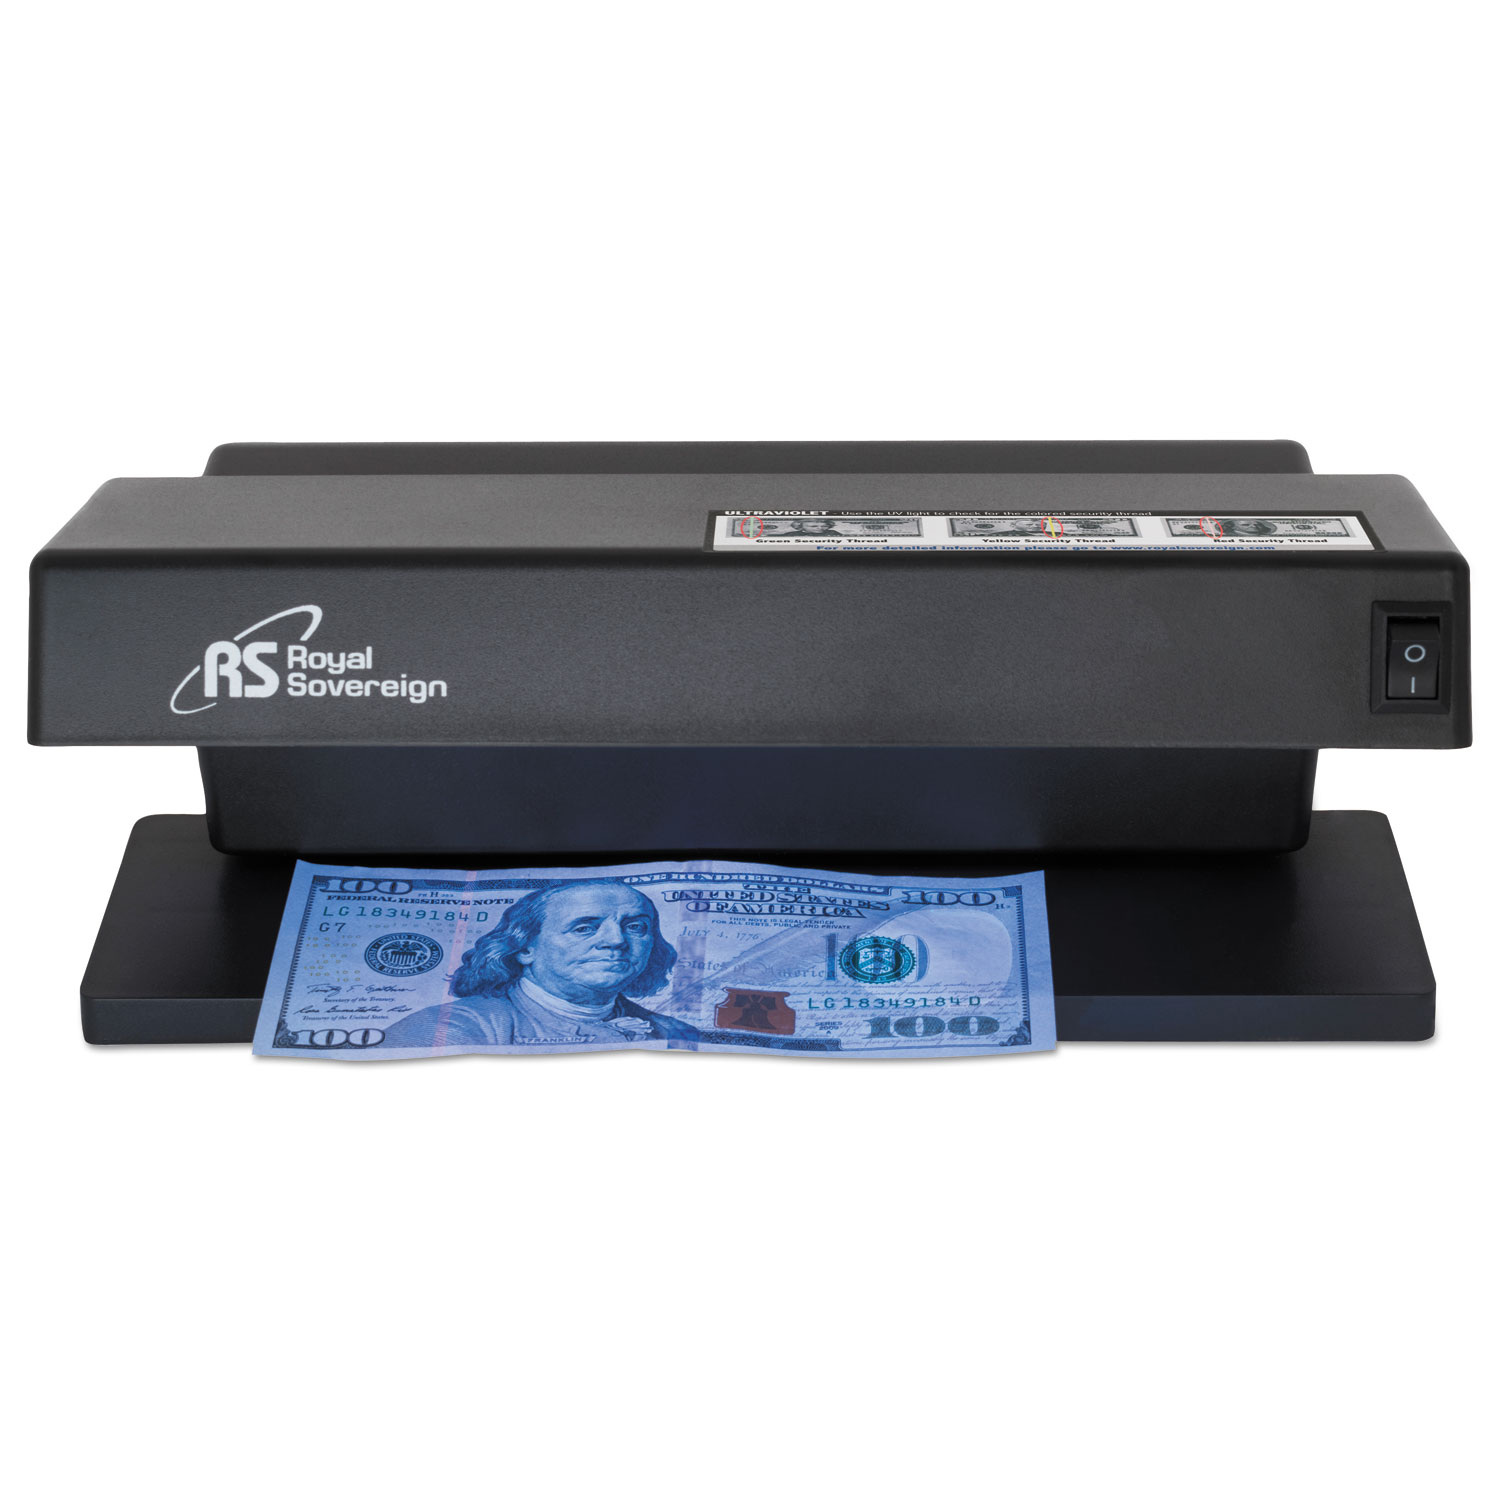  Royal Sovereign RCD-1000 Ultraviolet Counterfeit Detector, U.S. Currency, 10.6 x 4.7 x 4.7, Black (RSIRCD1000) 